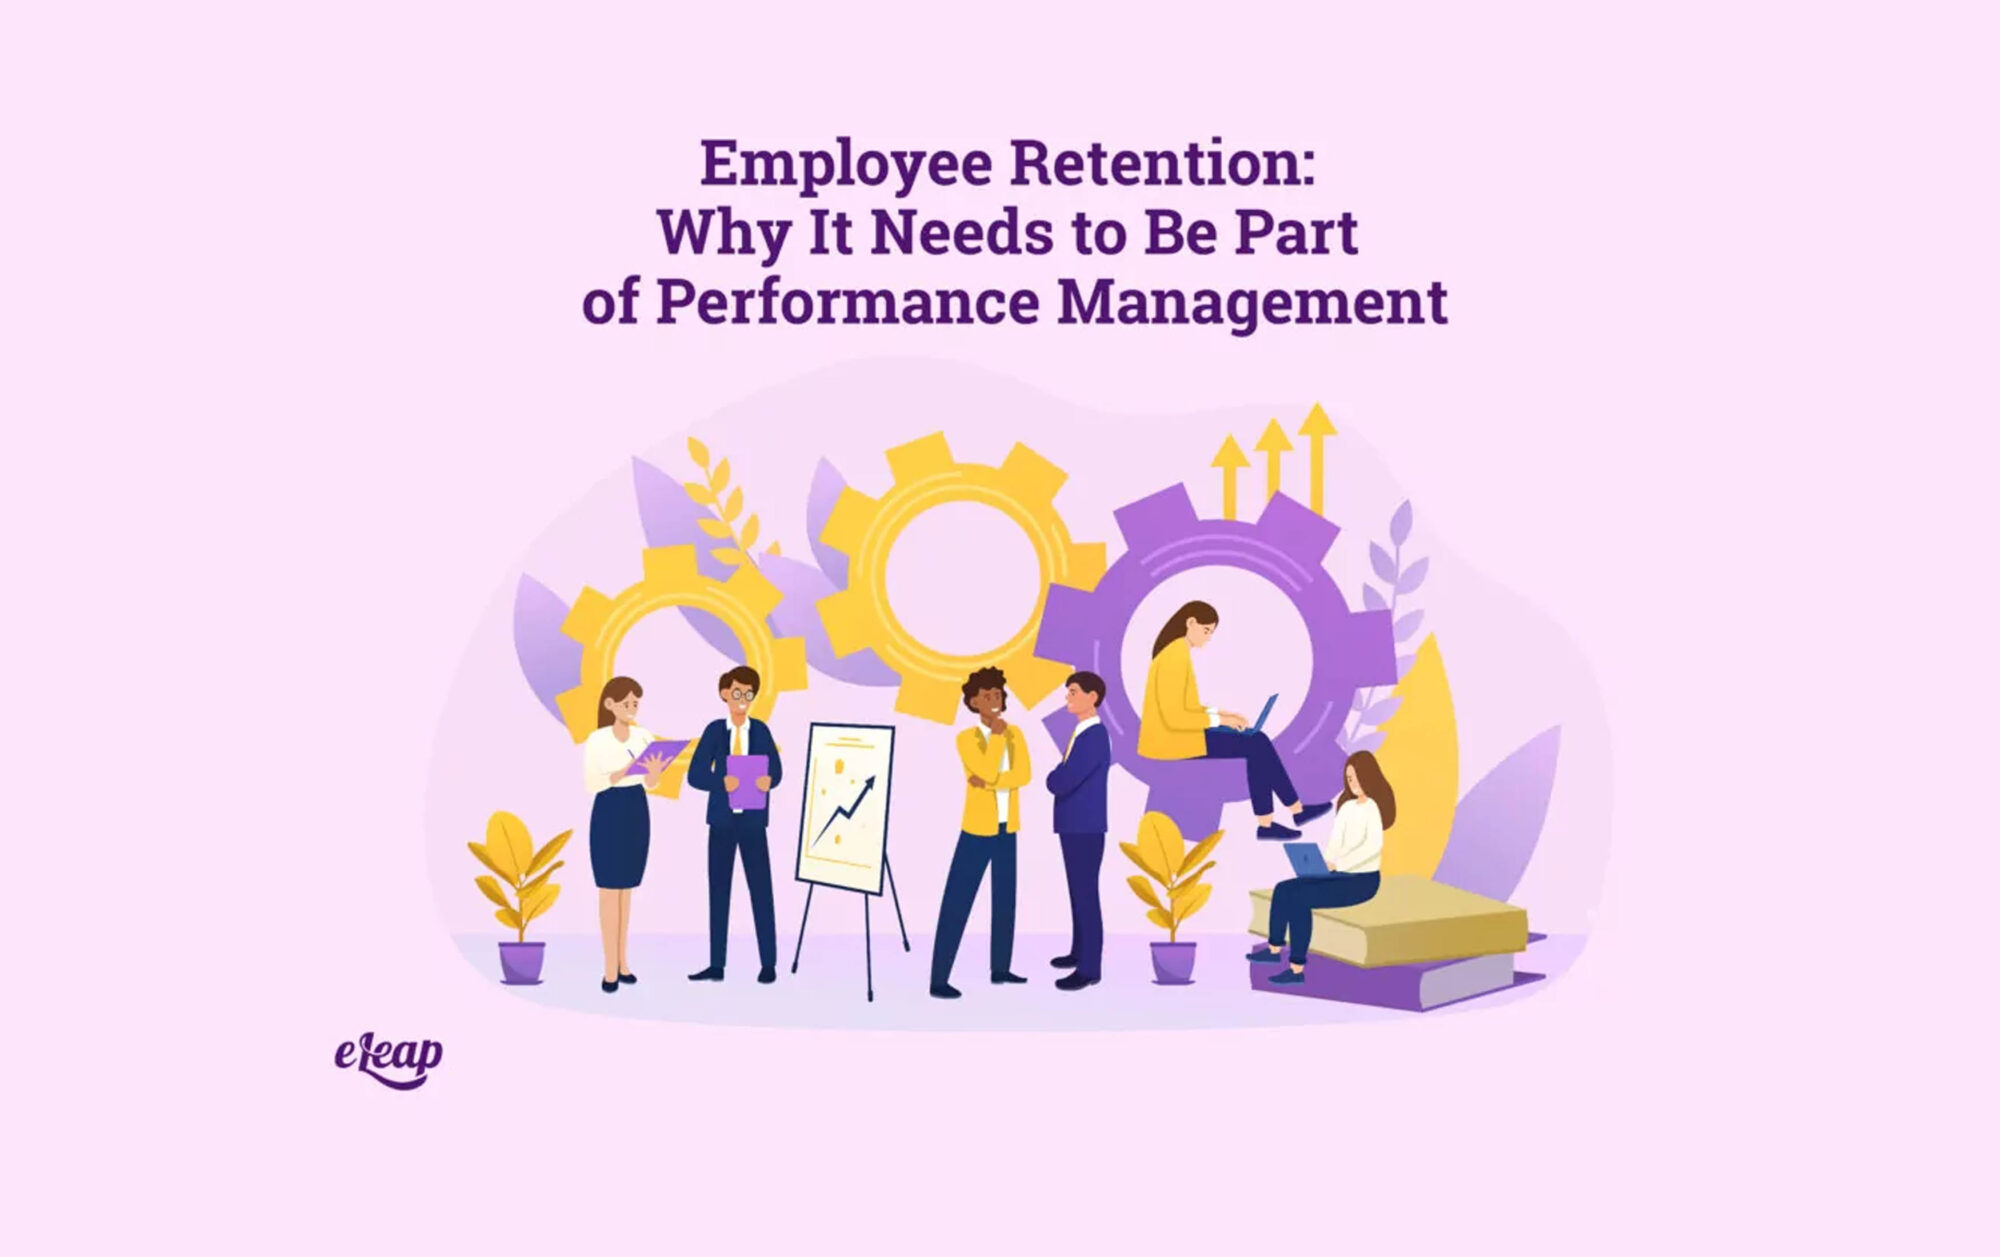 Employee Retention: Why It Needs to Be Part of Performance Management